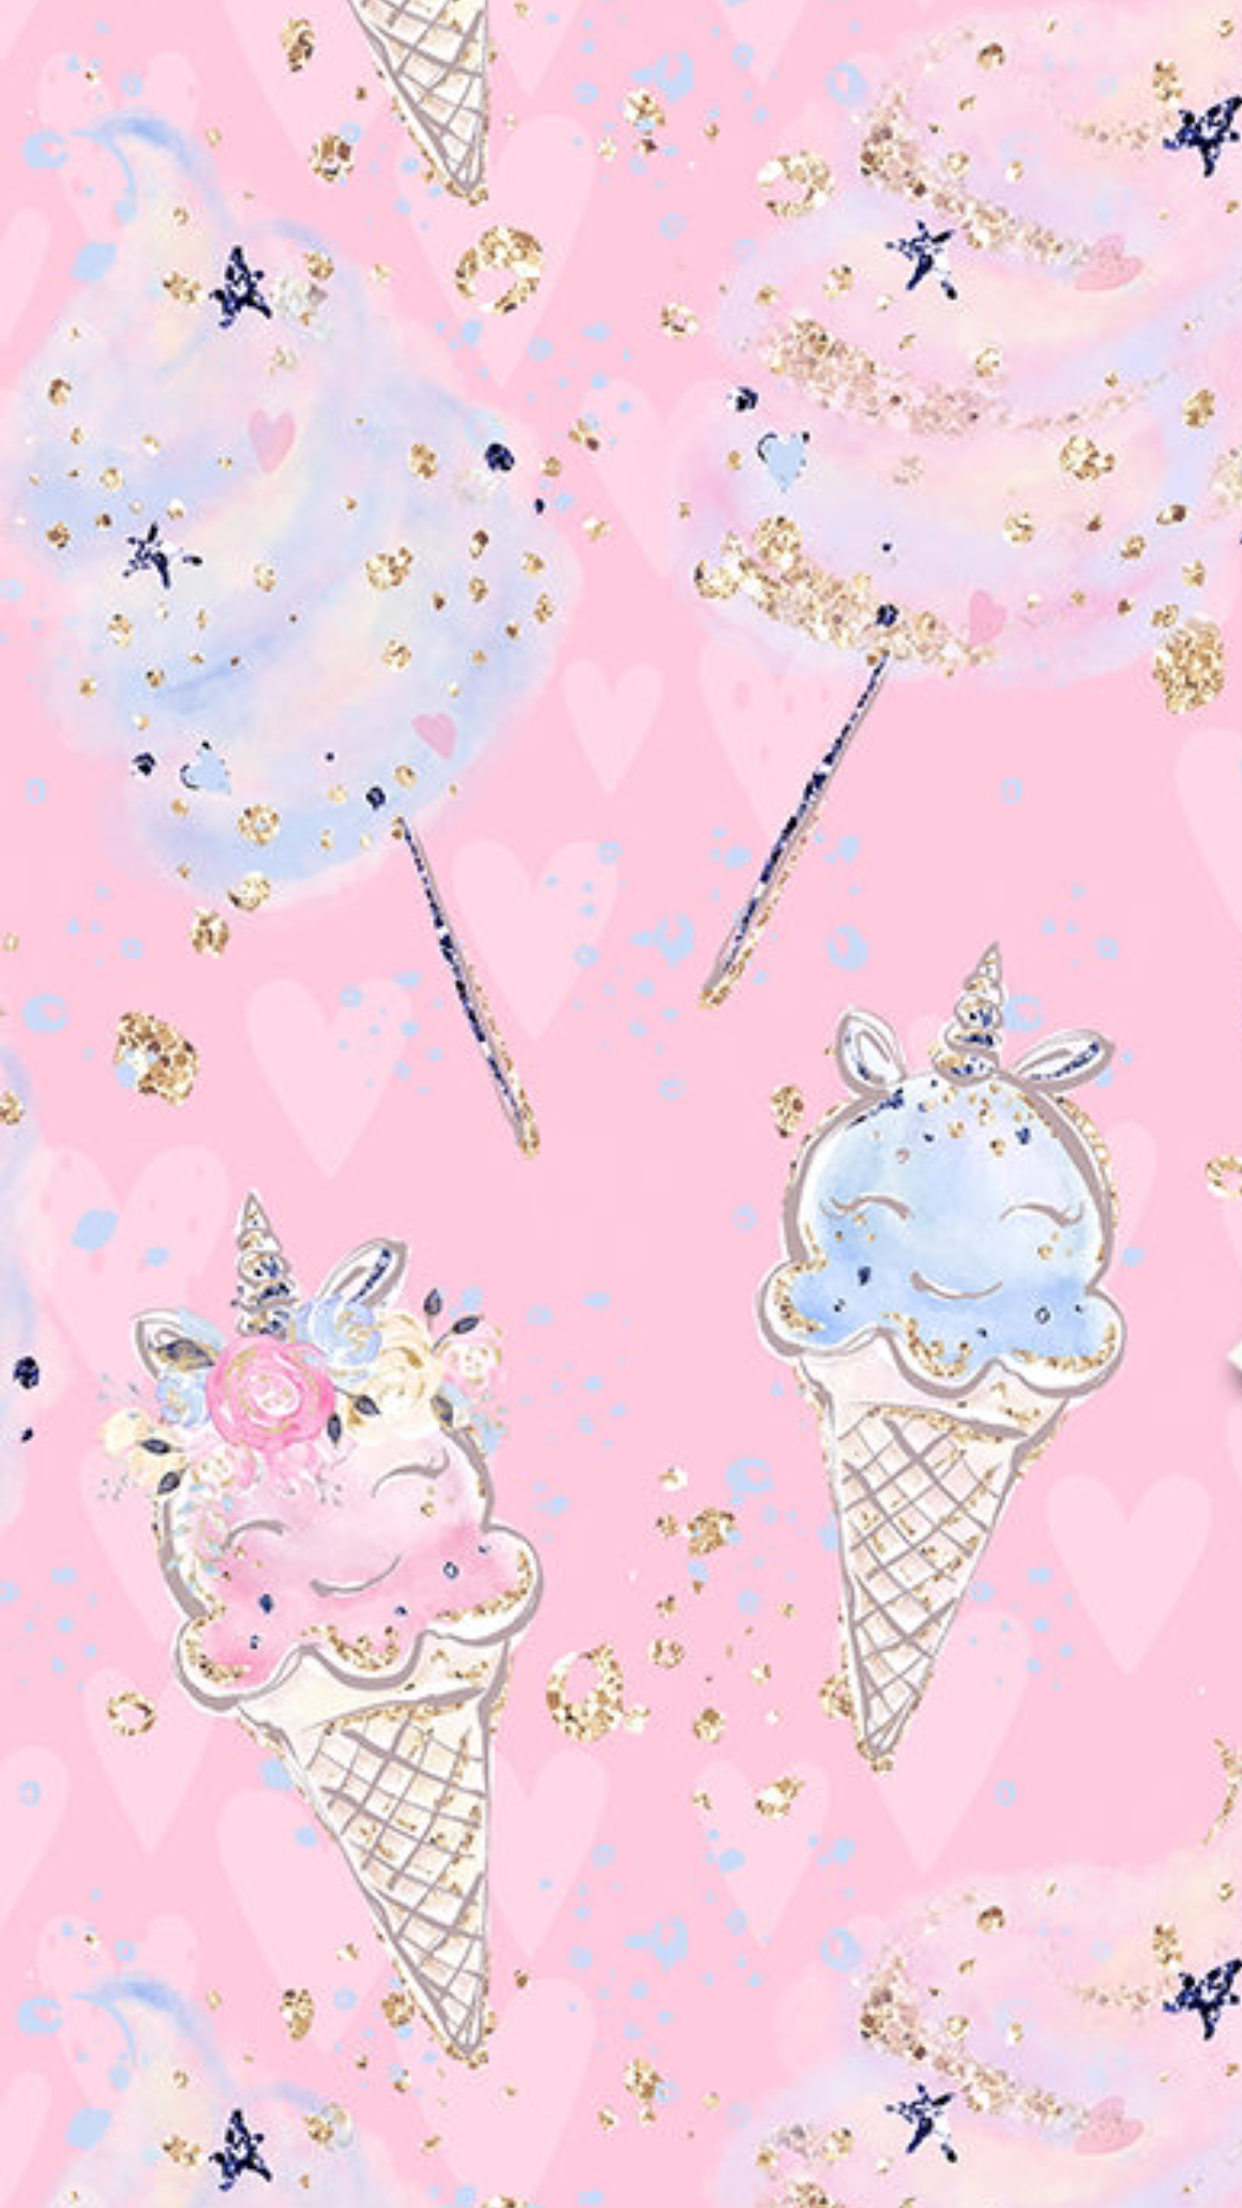 Ice cream and cotton candy Cute wallpapers Unicorn wallpaper